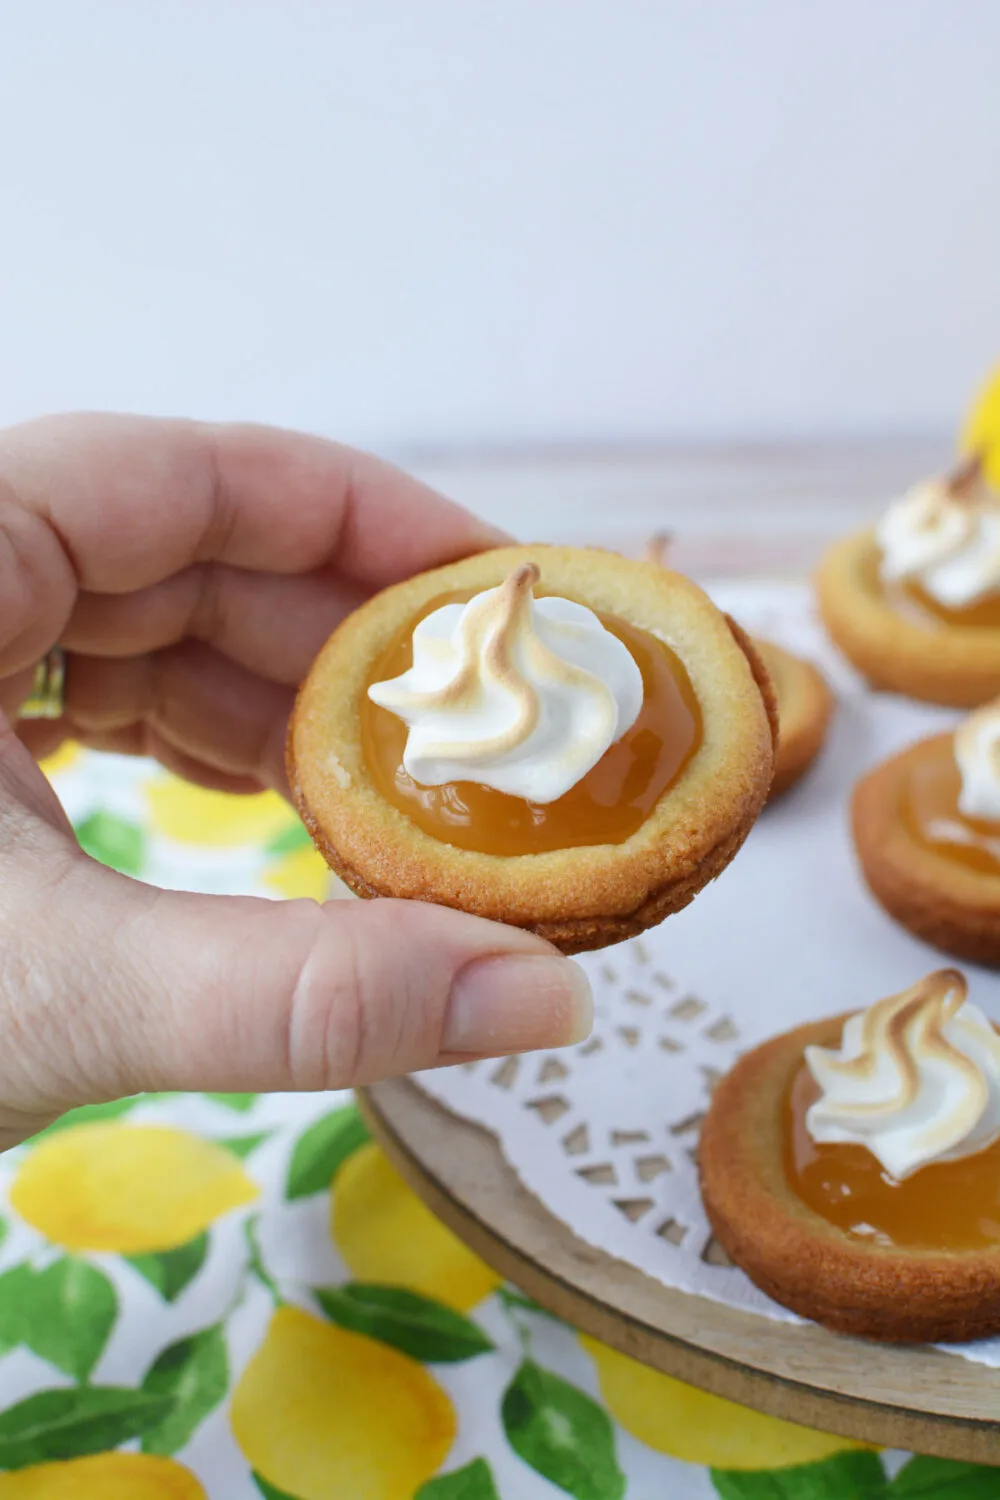 Holding a lemon curd cookie topped with meringue.